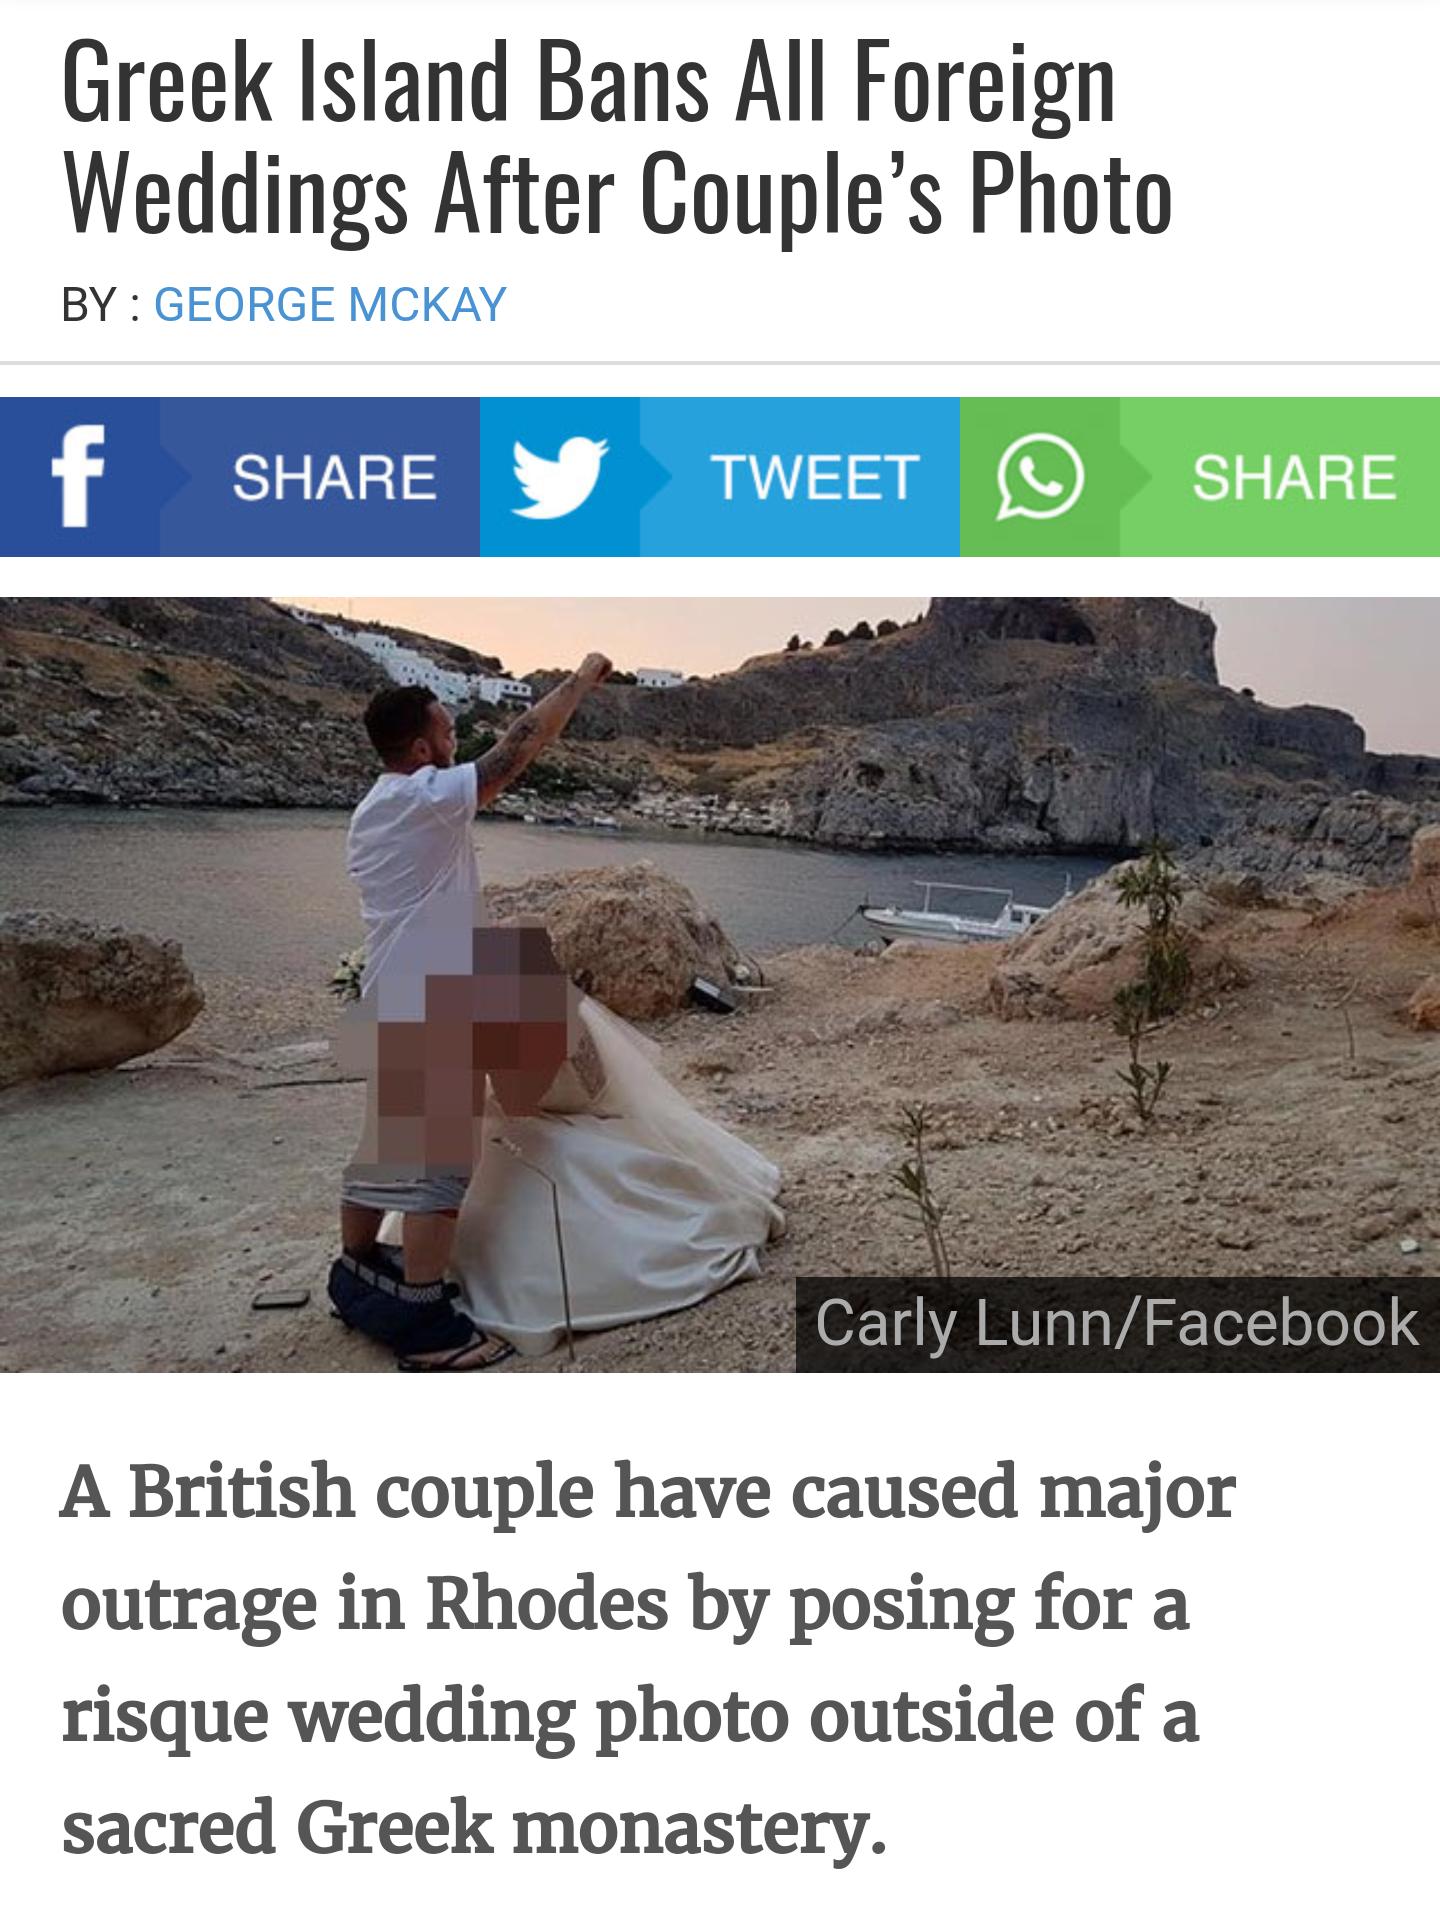 Greek Island Bans All Foreign Weddings After Couple's Photo By George Mckay f Y Tweet Carly LunnFacebook A British couple have caused major outrage in Rhodes by posing for a risque wedding photo outside of a sacred Greek monastery.